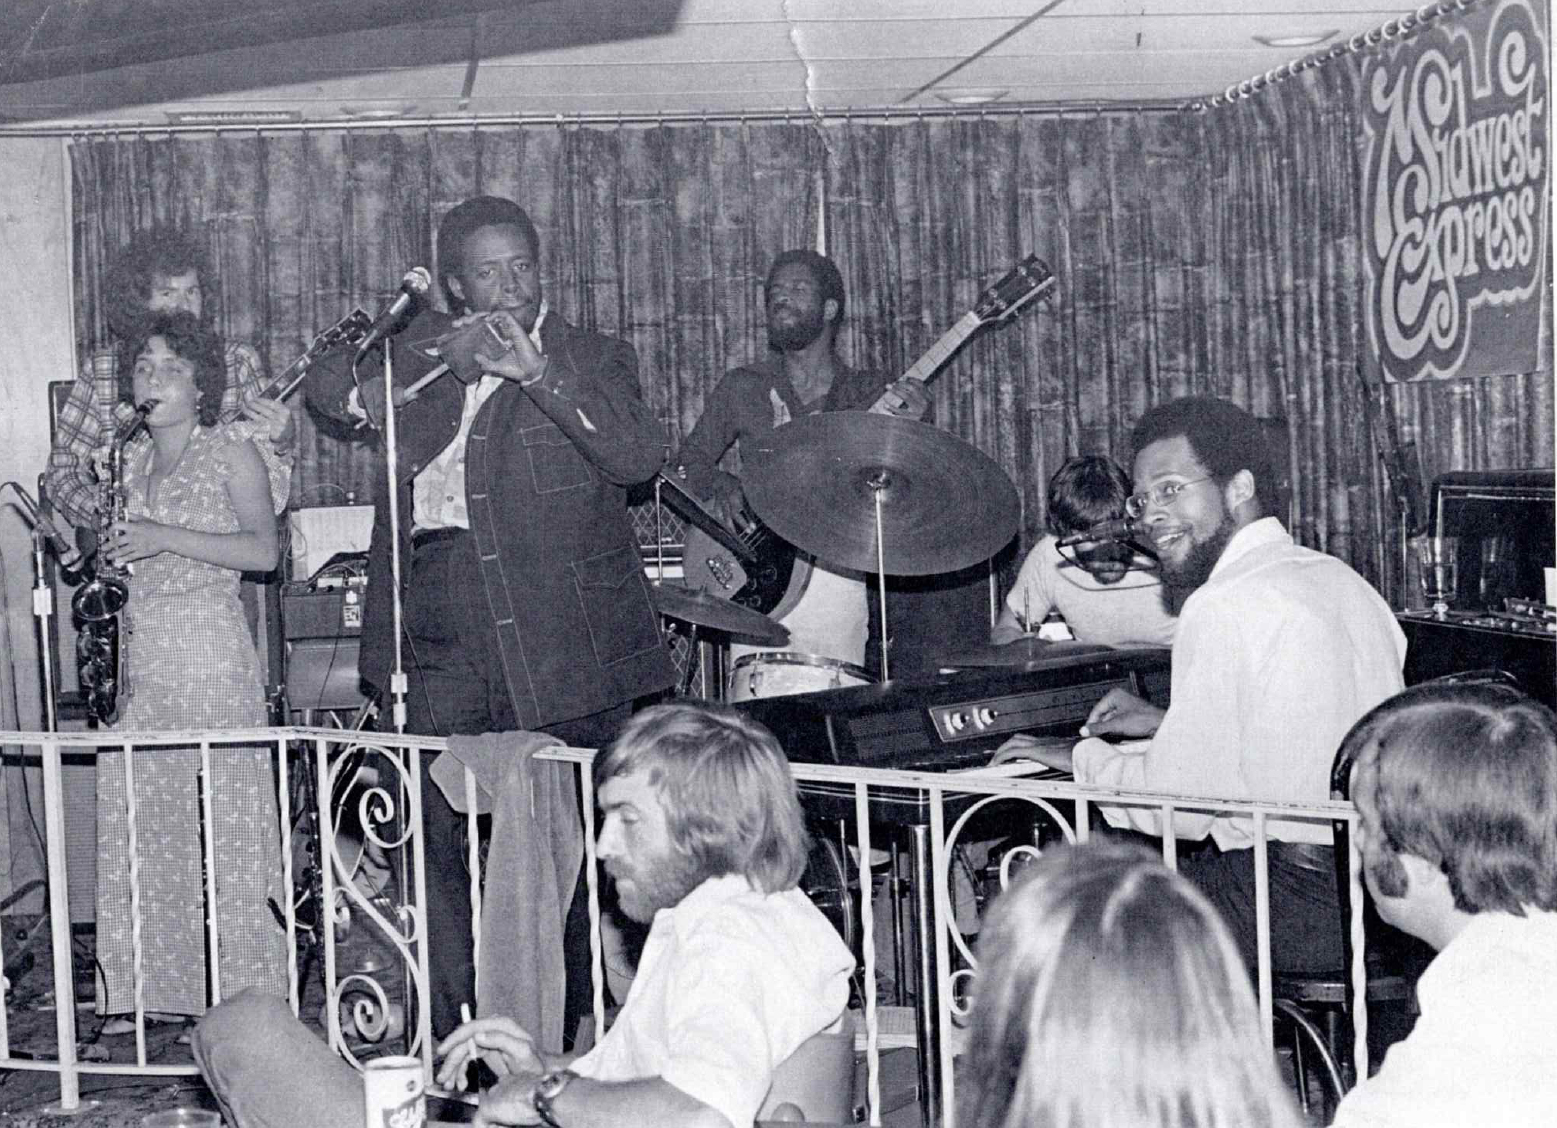  Midwest Express playing a gig in 1976. From far left, Marcia Miget is on saxophone, with Danny Nicholson behind her on guitar and Big Mike Edwards next to her at the mic. Dartanyan Brown (against the back wall) is on bass, John Grguric is on drums, and Bobby Parker is seated at the keyboard